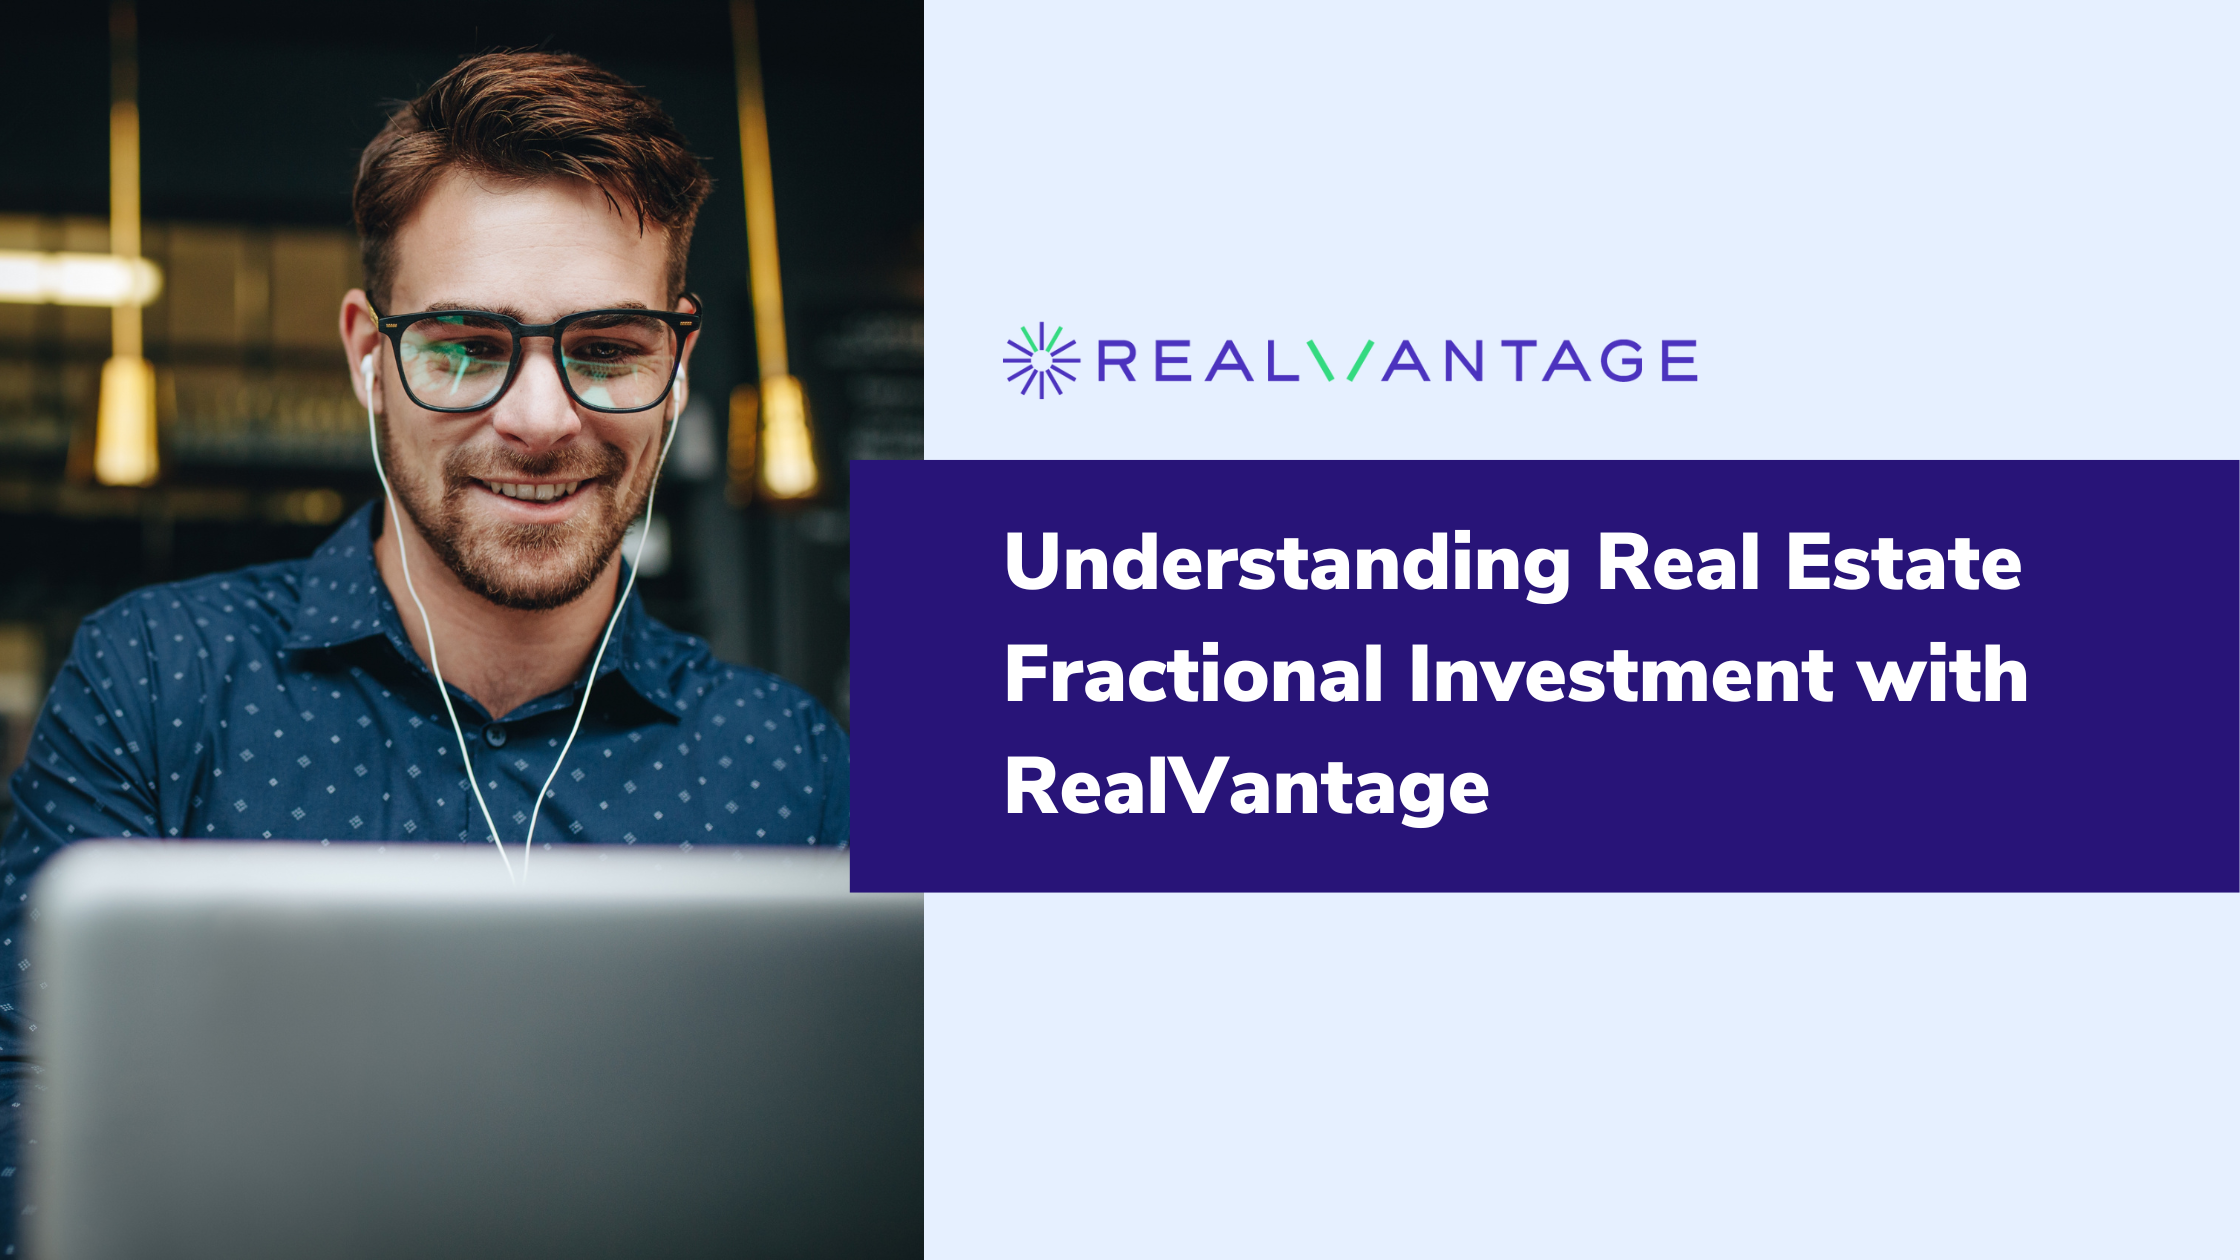 Understanding Real Estate Fractional Investment with RealVantage